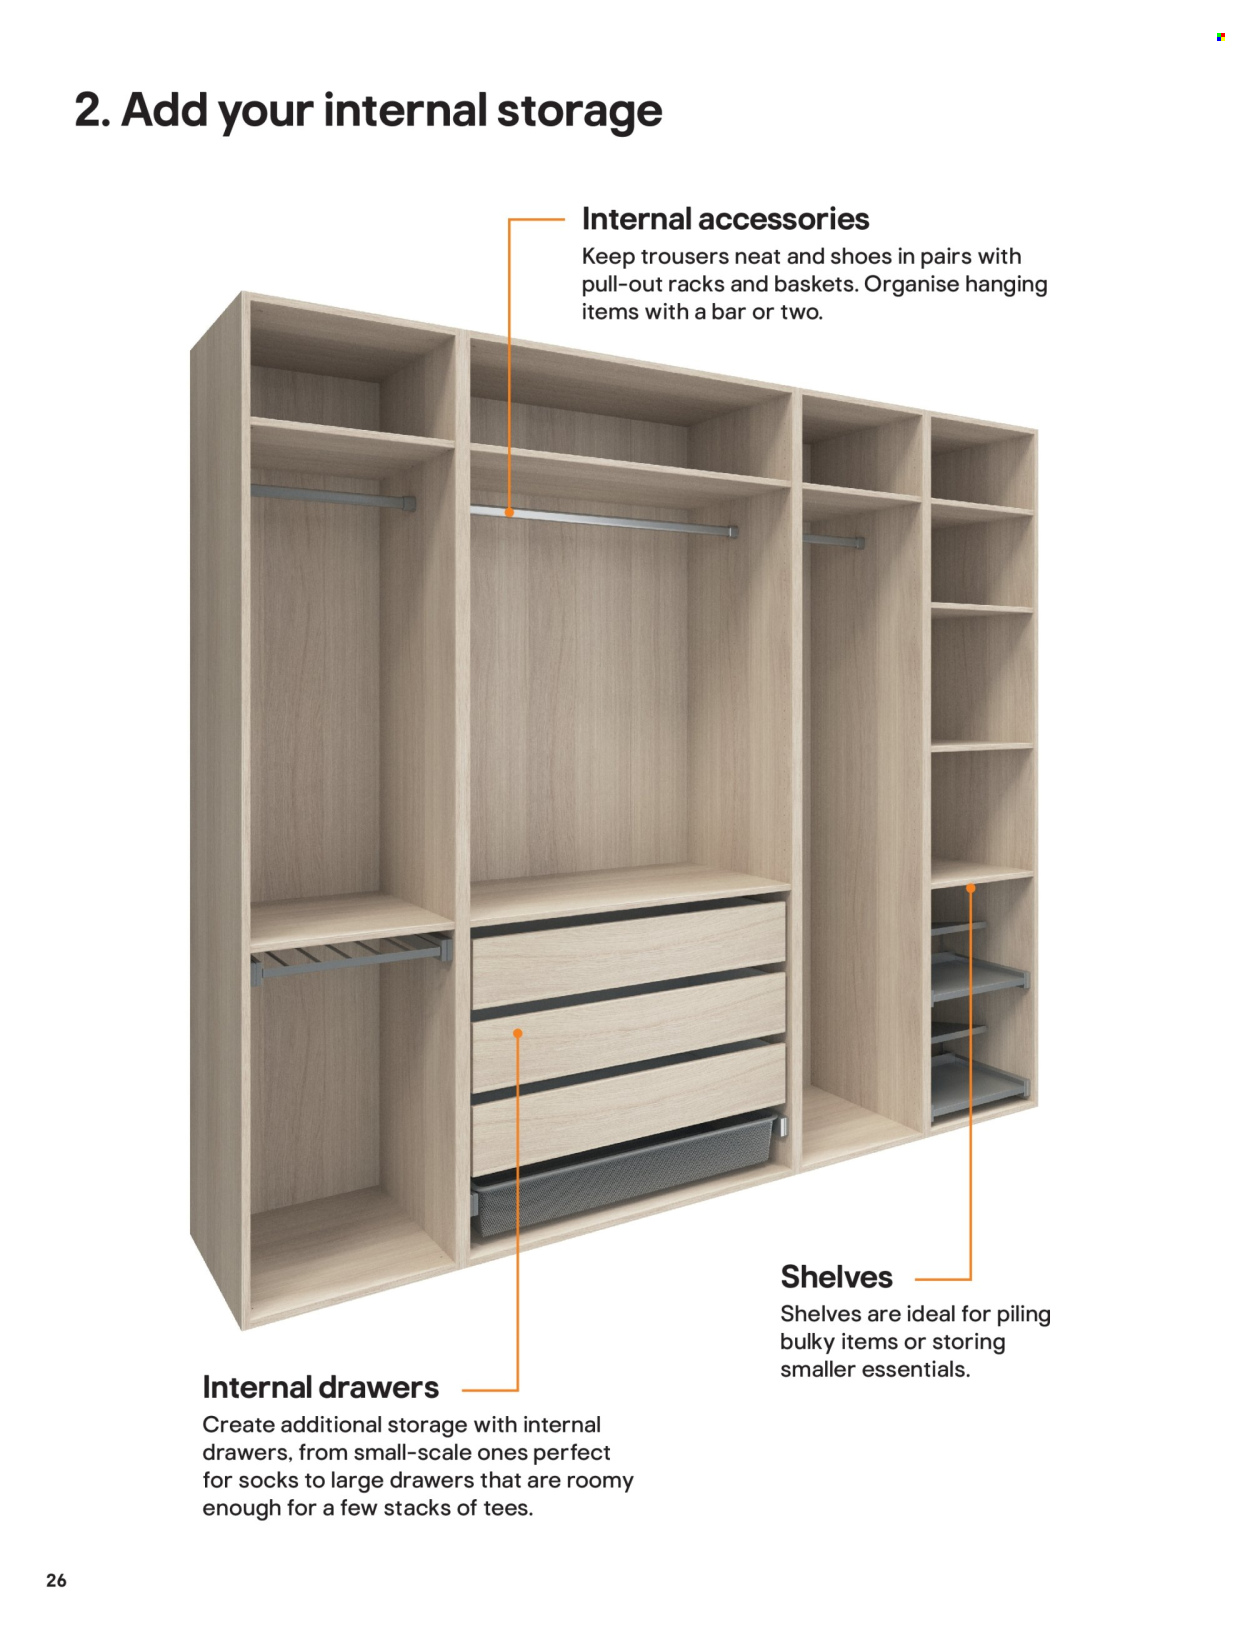 B&Q offer  - Sales products - shelves. Page 26.